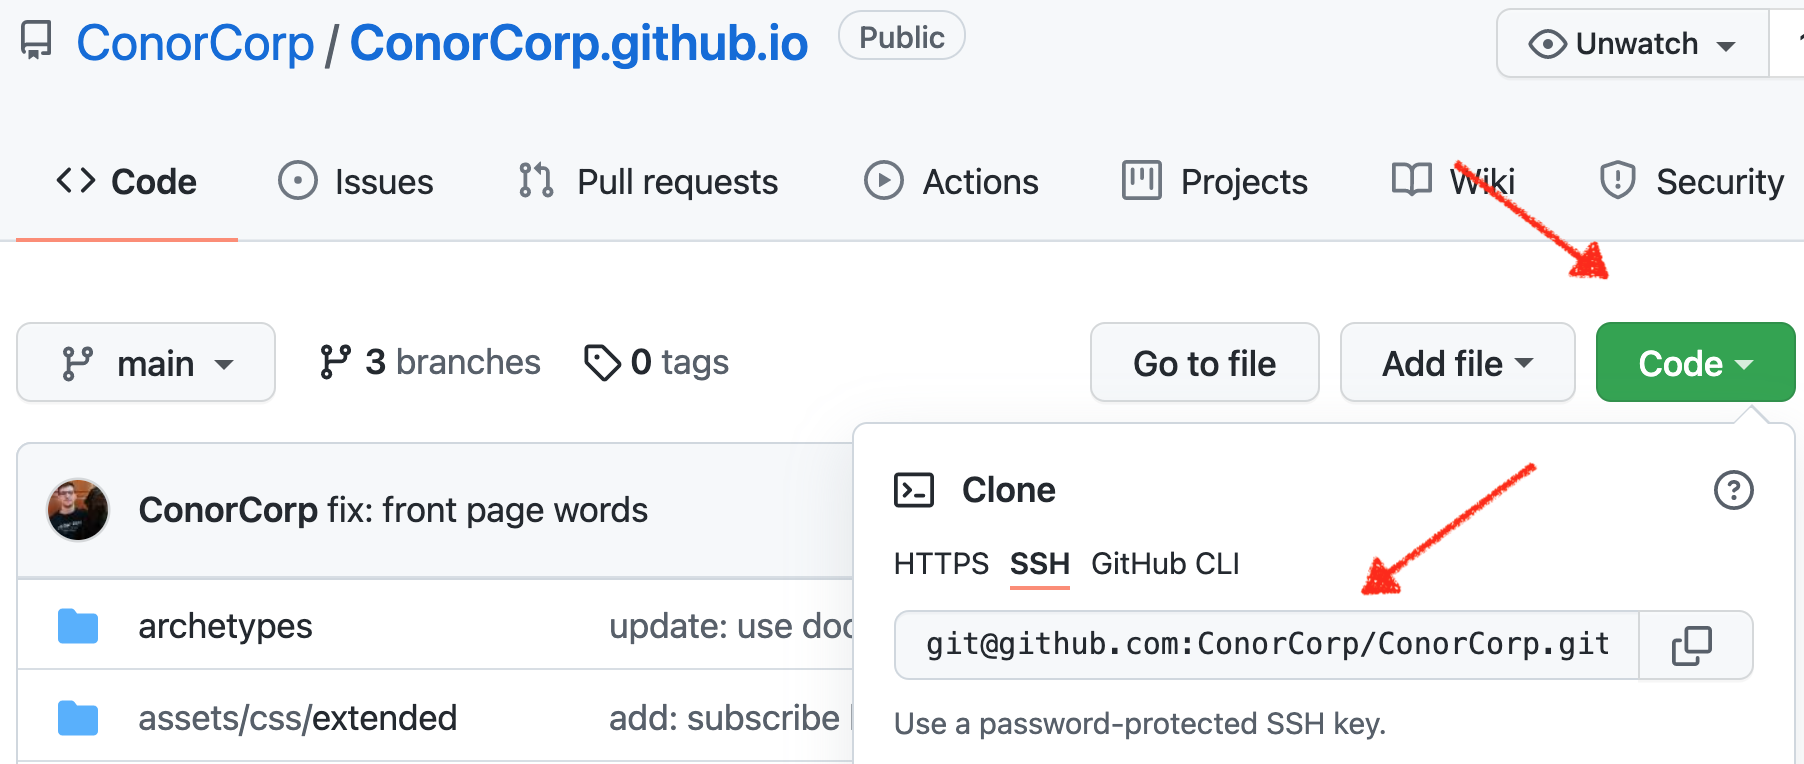 Example of the created GitHub repo and url to clone it.